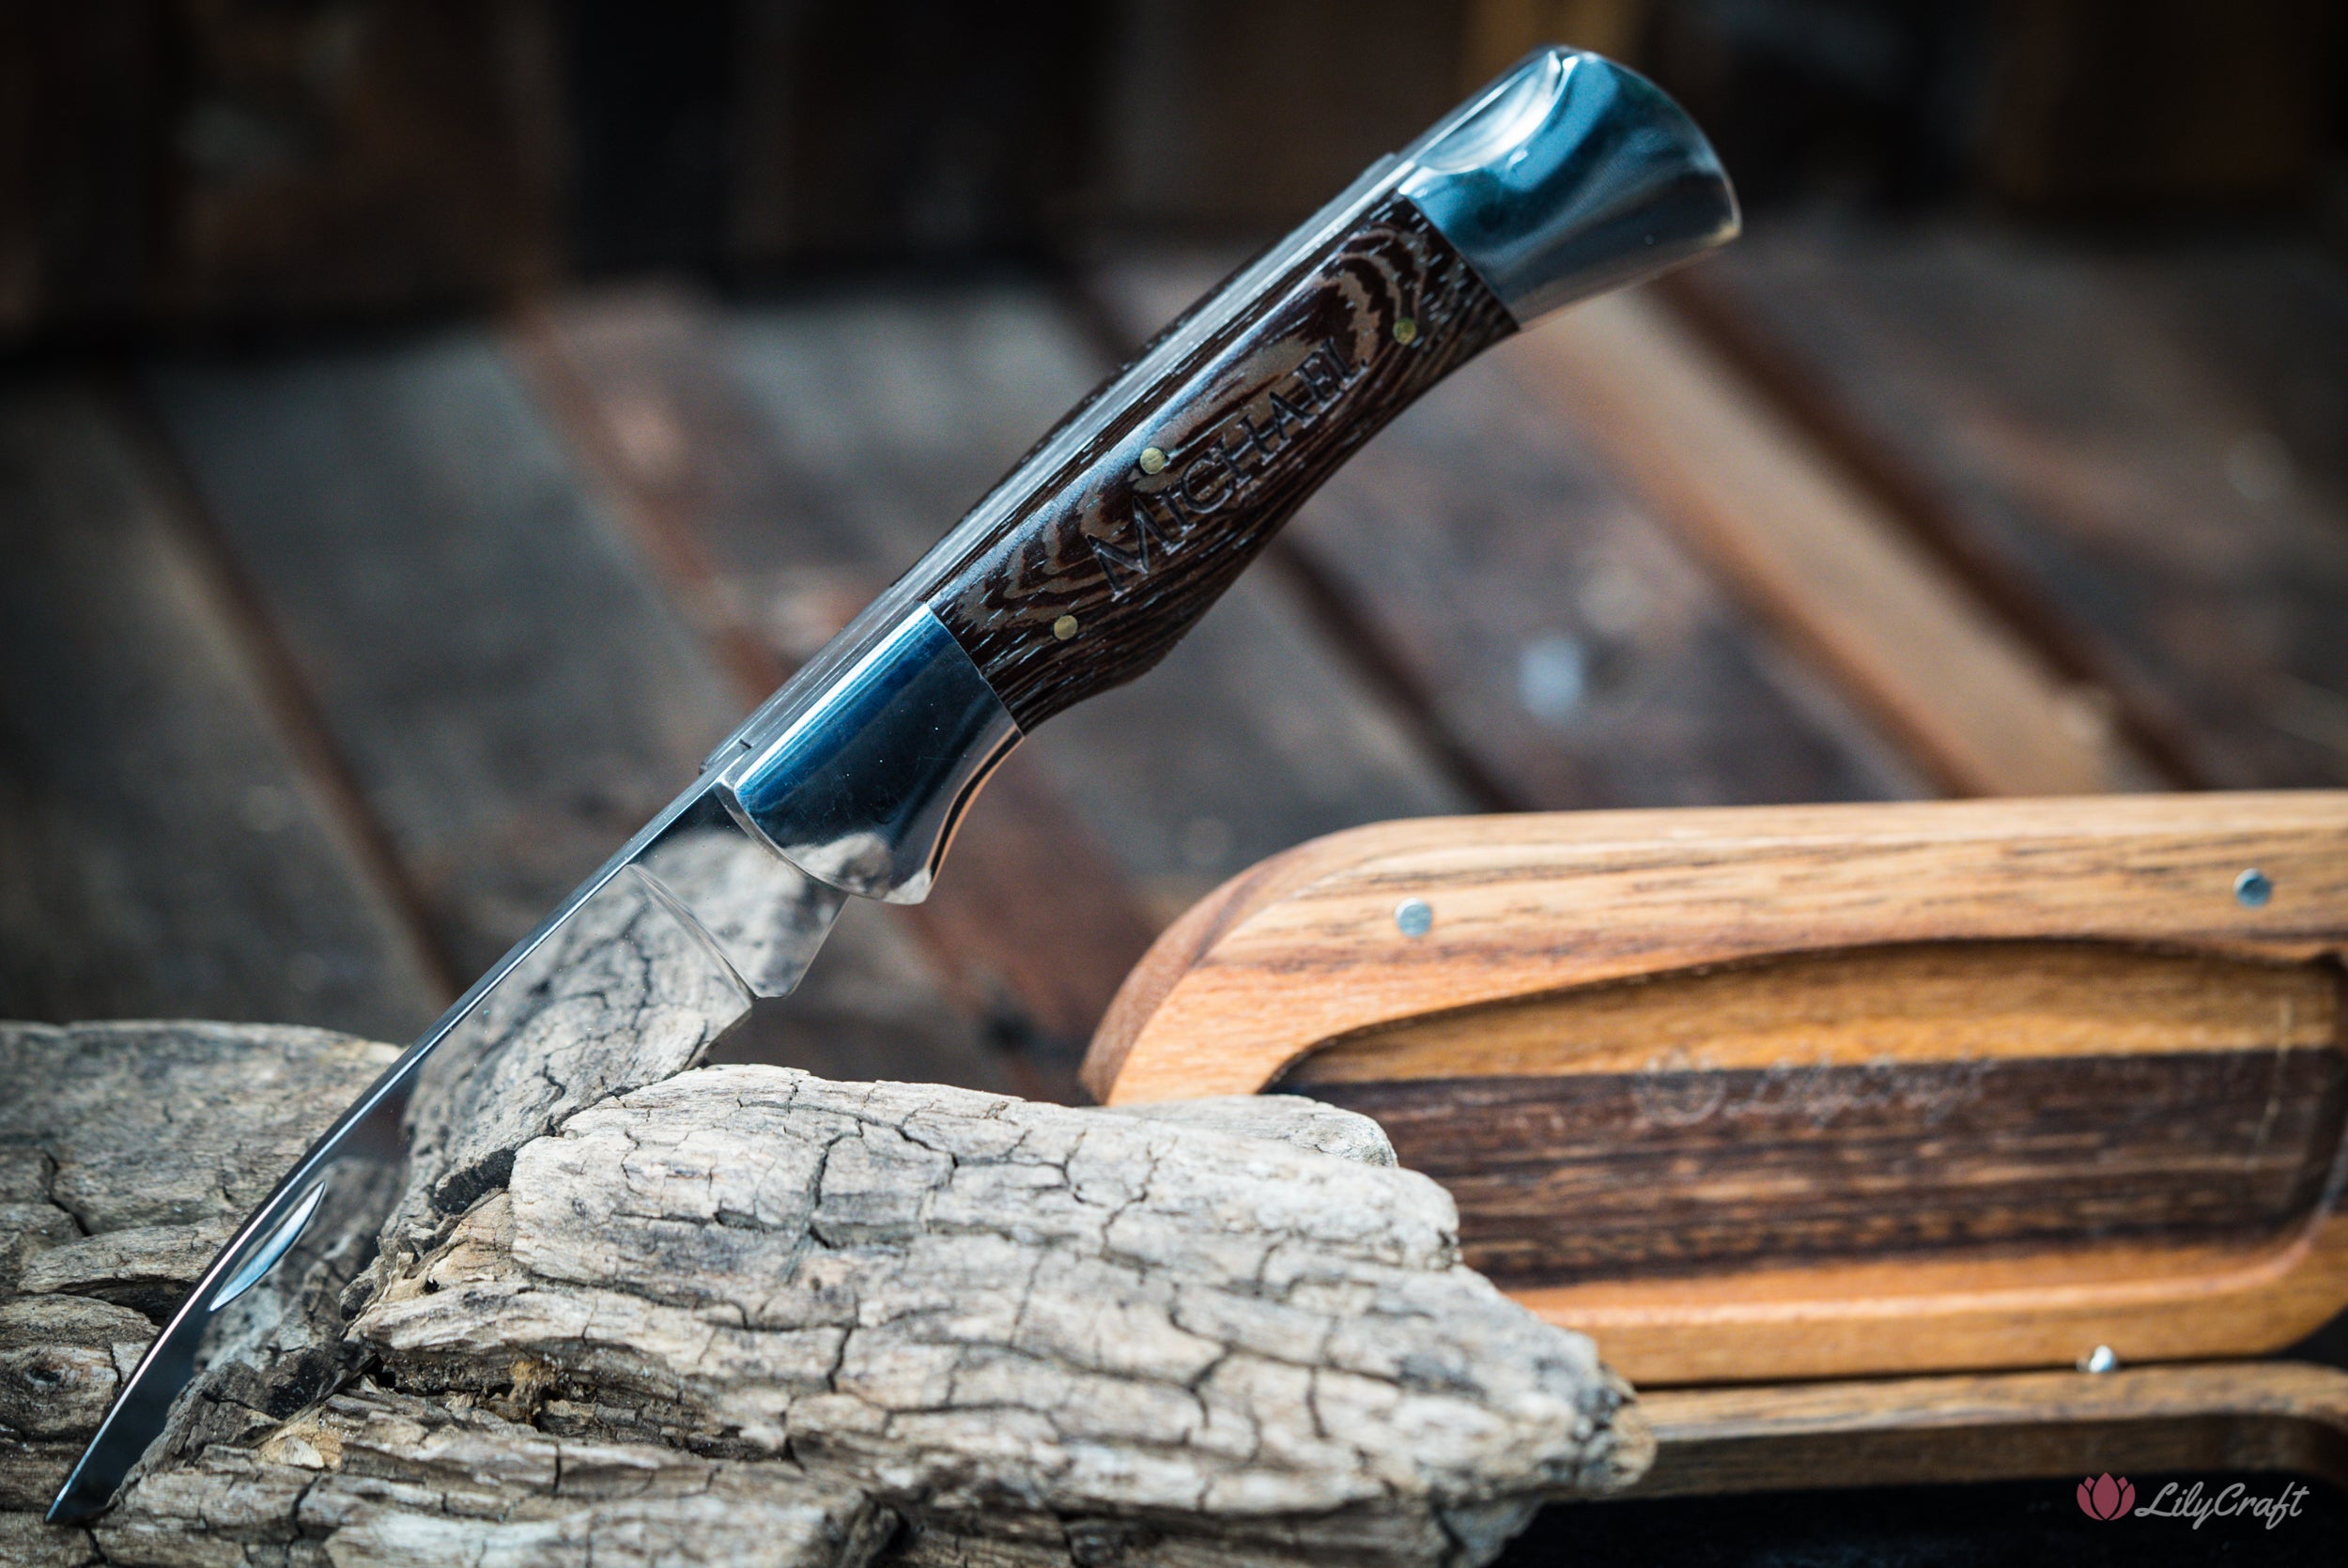 Gentleman's folding pocket knife with personalised engraved handle made from wenge wood